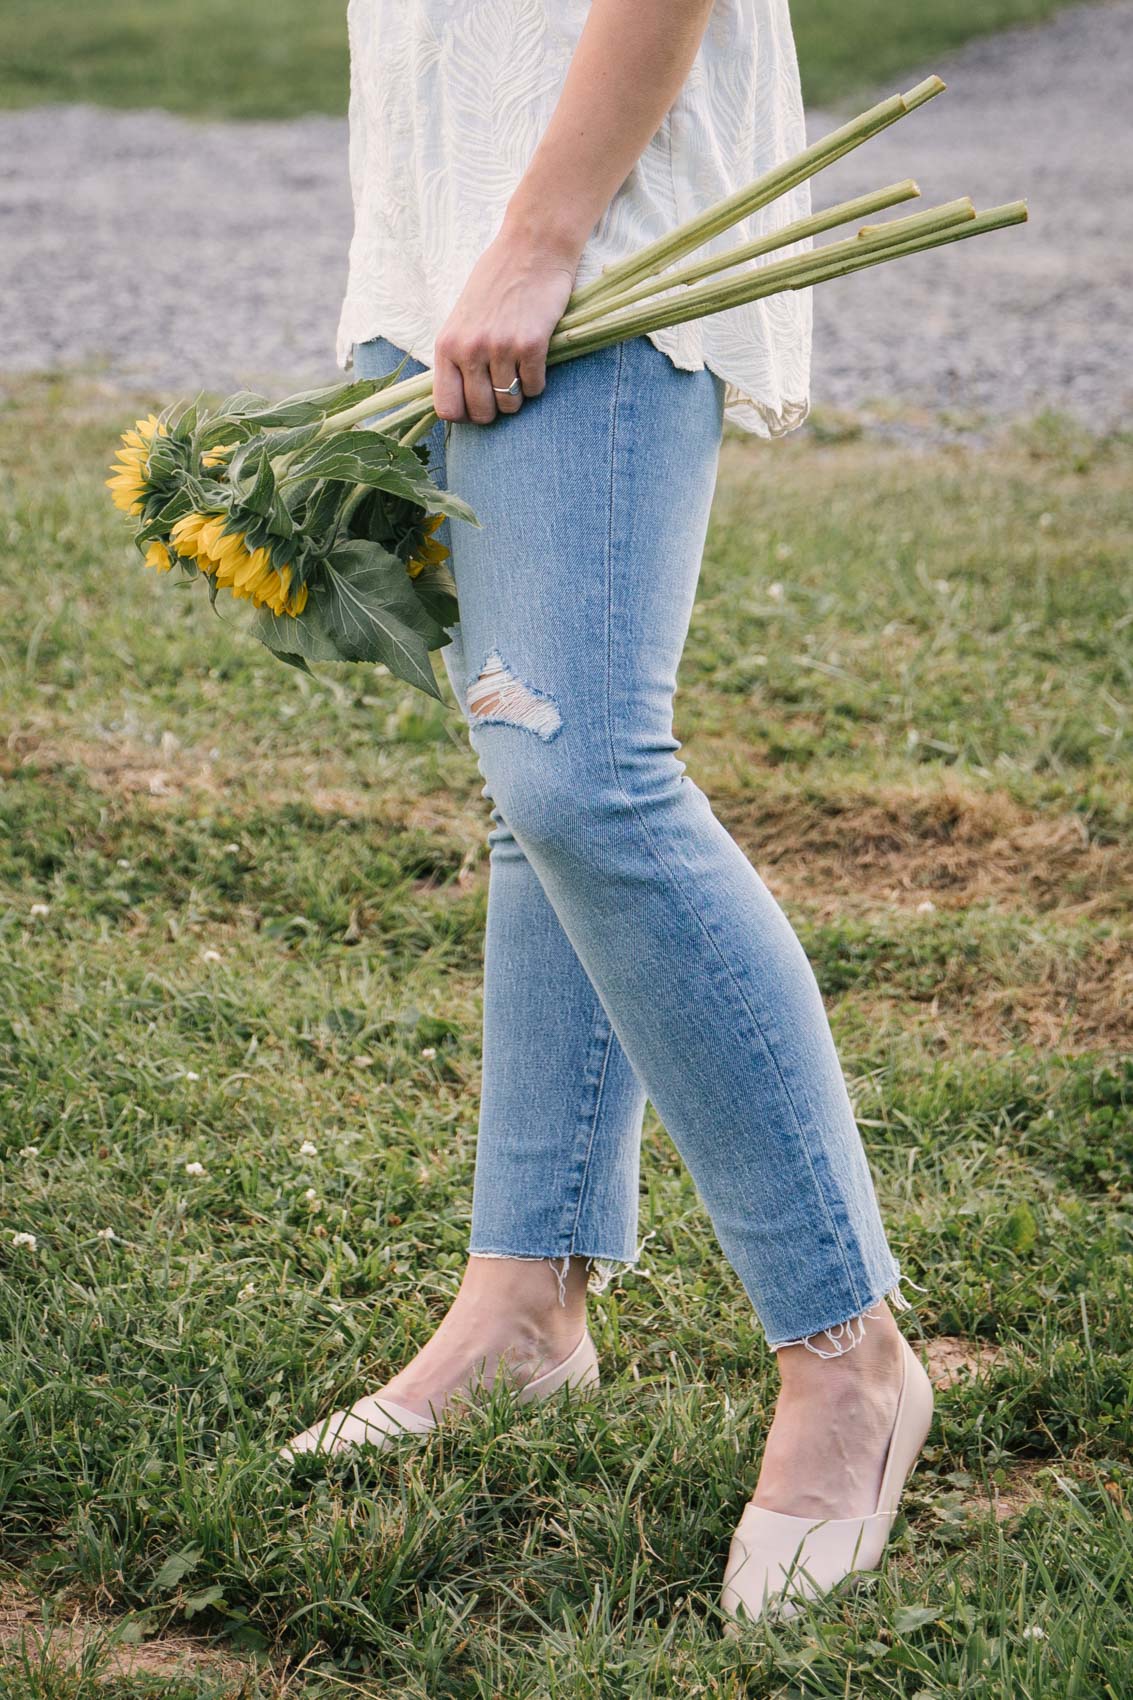 Madewell Perfect Vintage Jeans (Rosabelle - medium wash) styled with flats and sunflowers